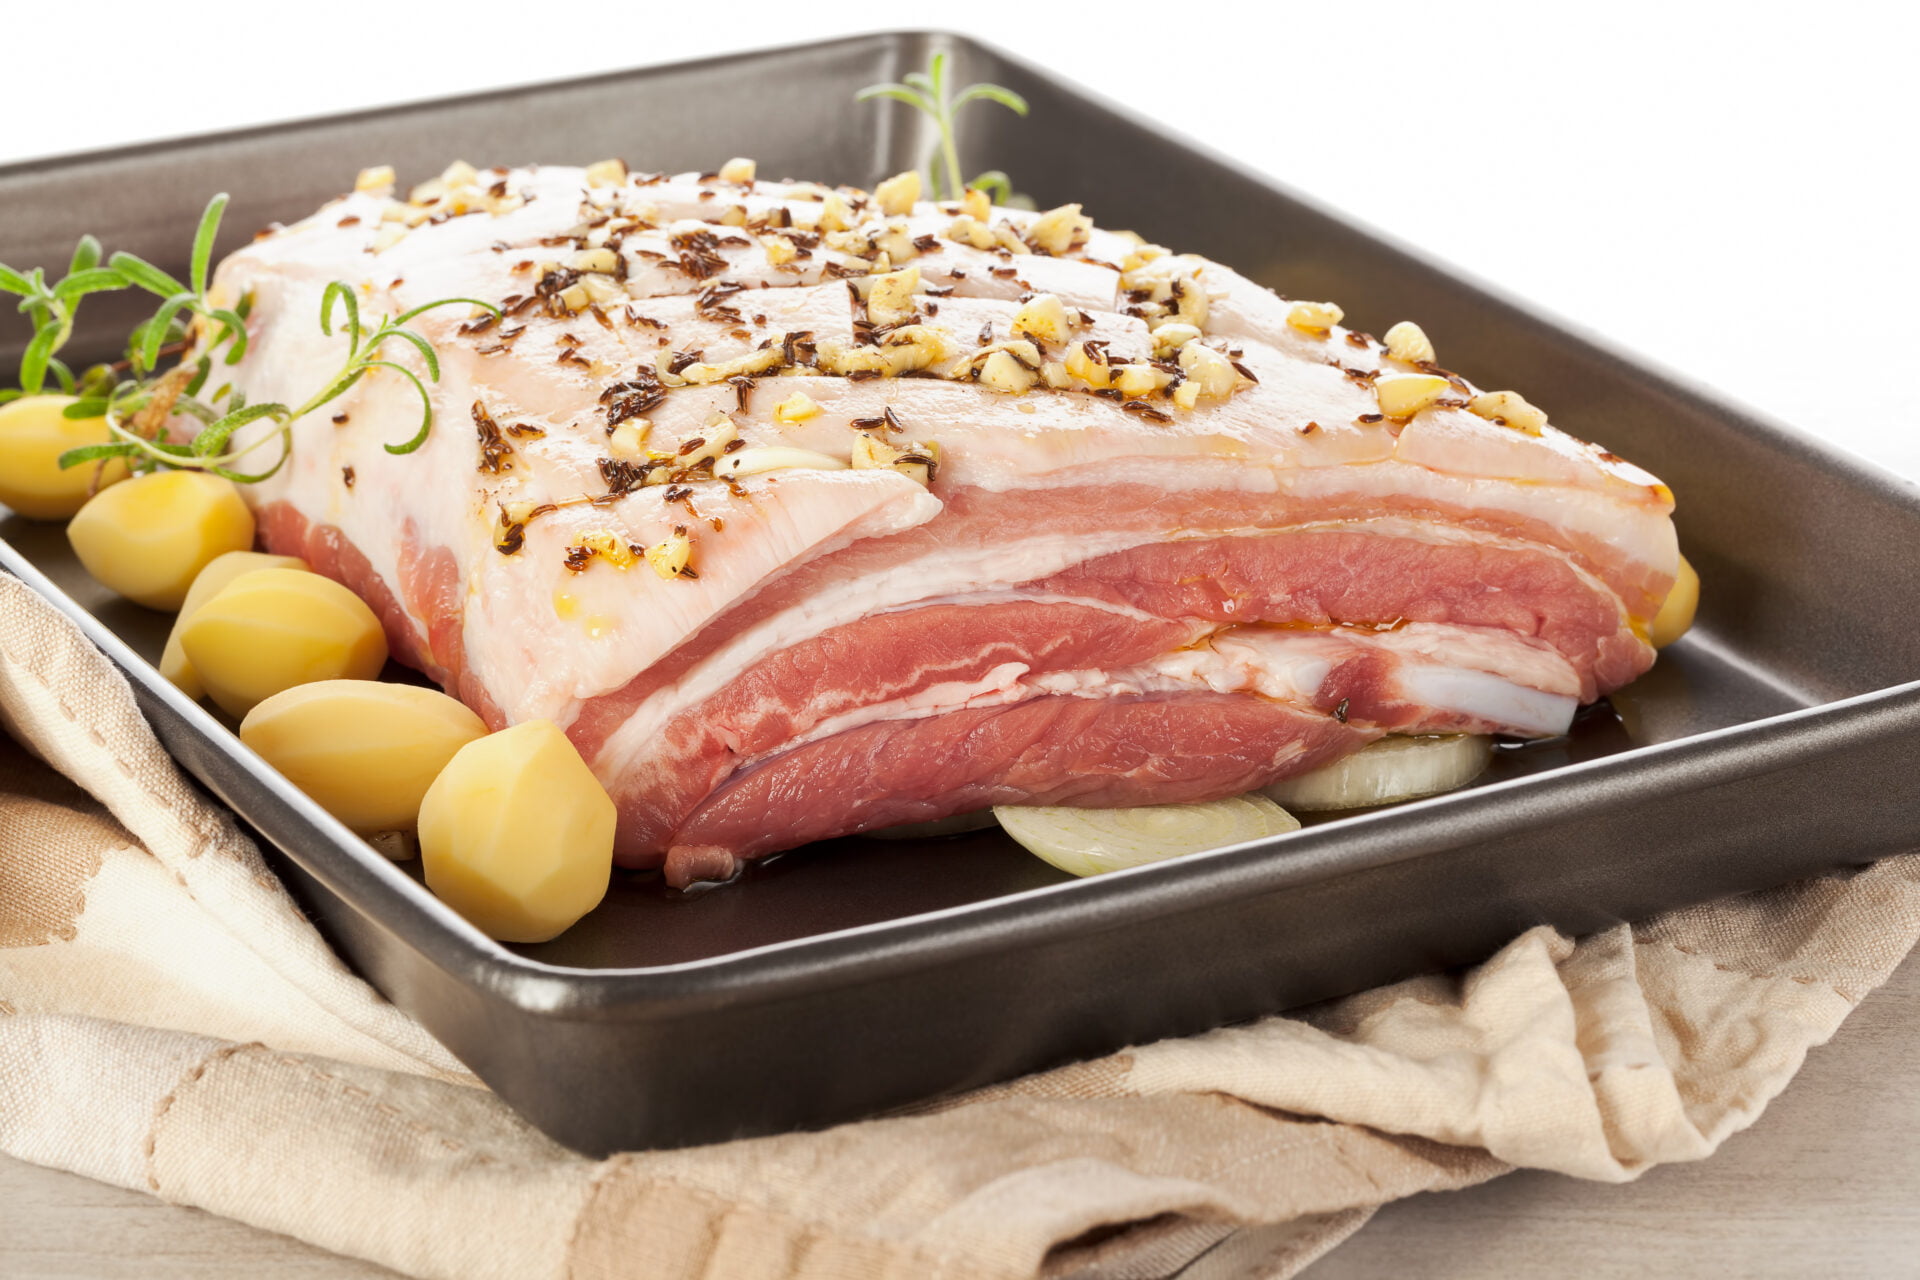 Delicious raw pork belly with fresh herbs and potatoes on baking tray. Luxurious meat eating.